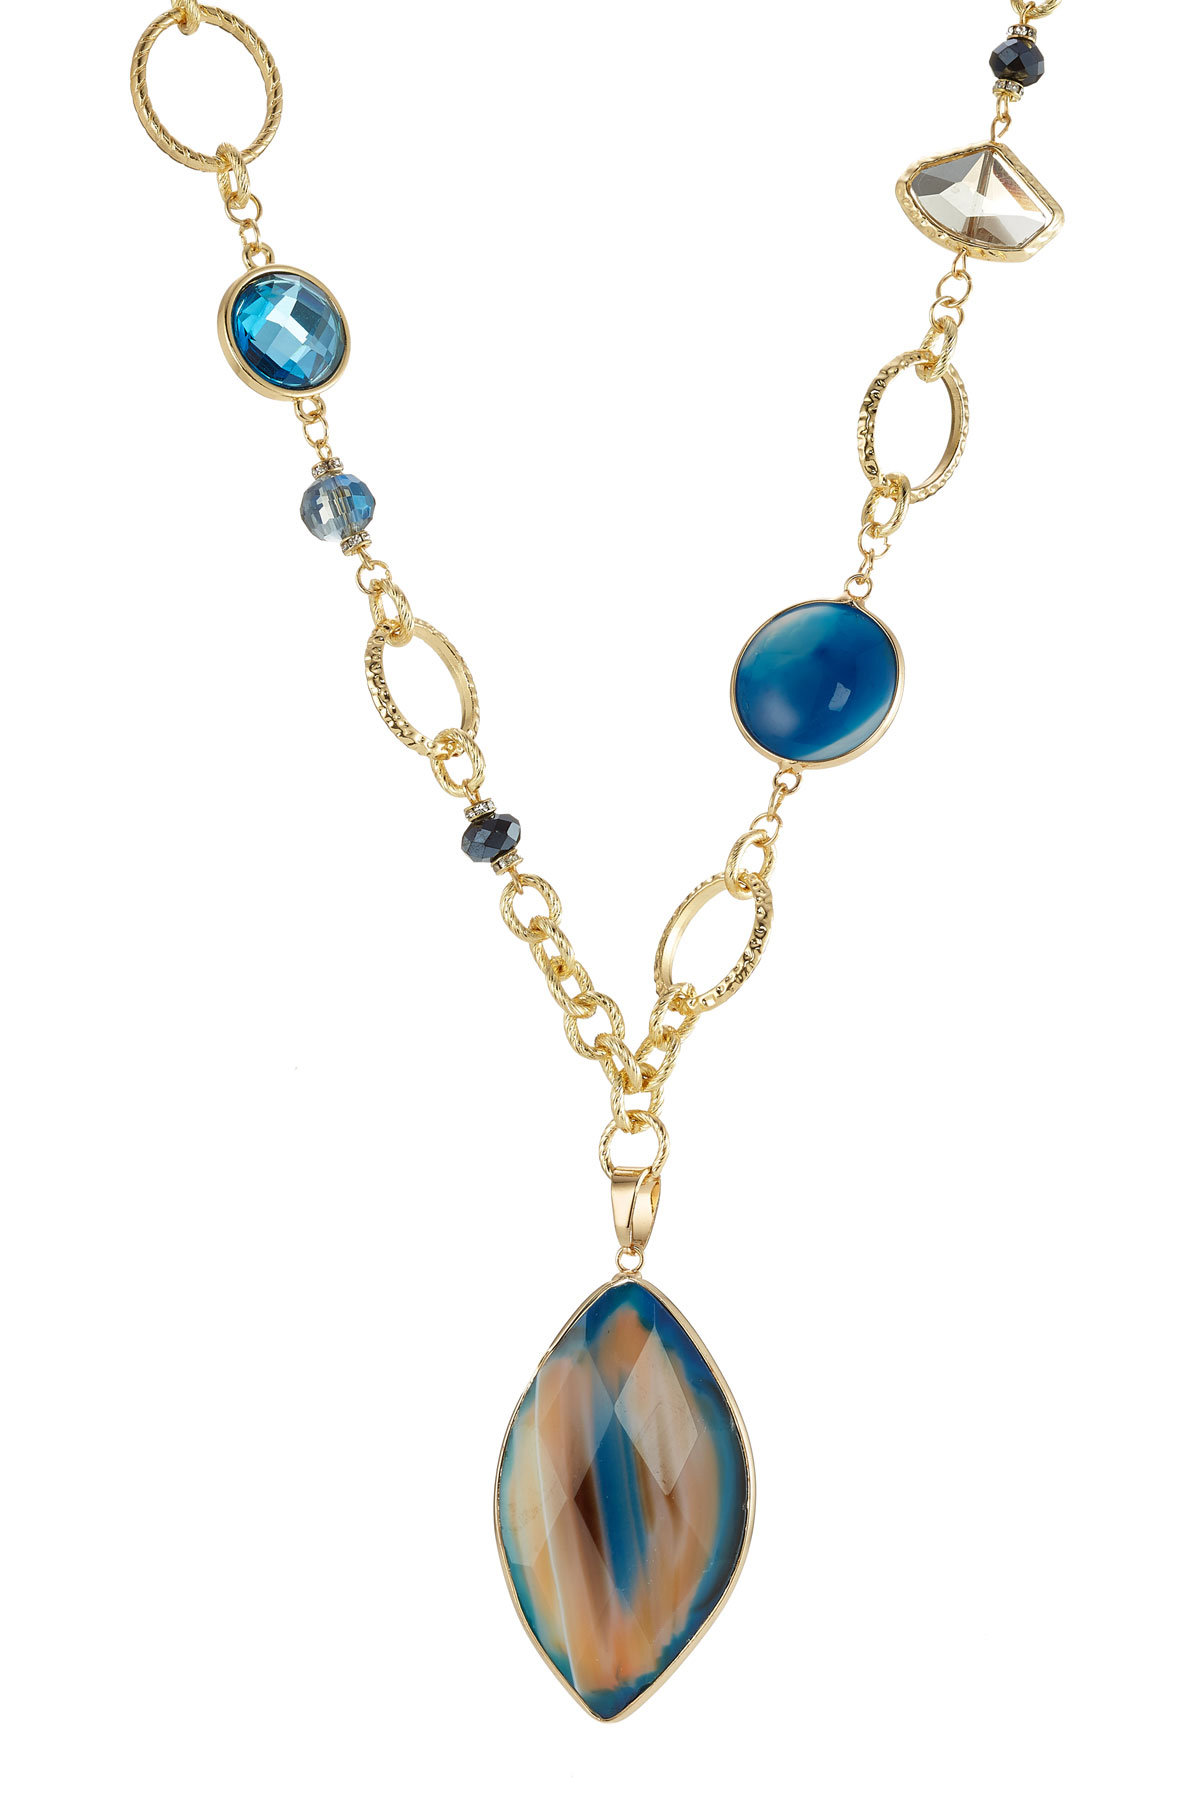 Kenneth Jay Lane - Gilded Necklace with Faceted Stones